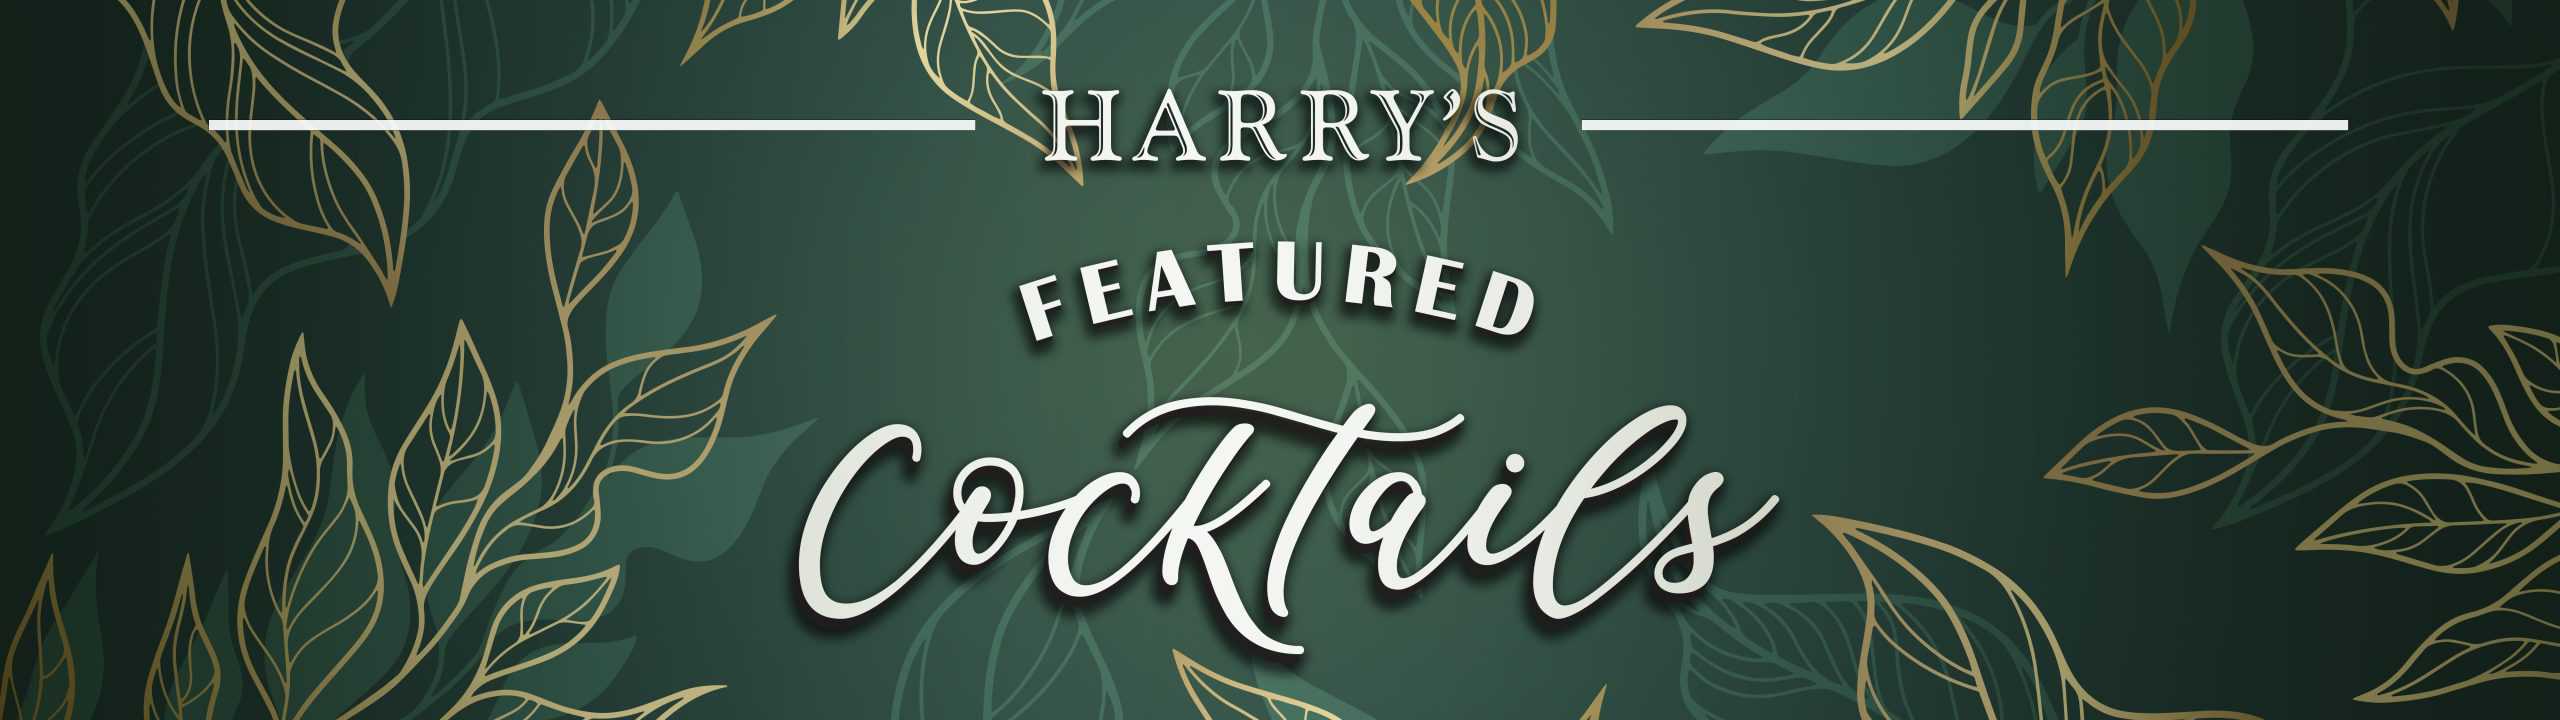 Harry's Featured Cocktails